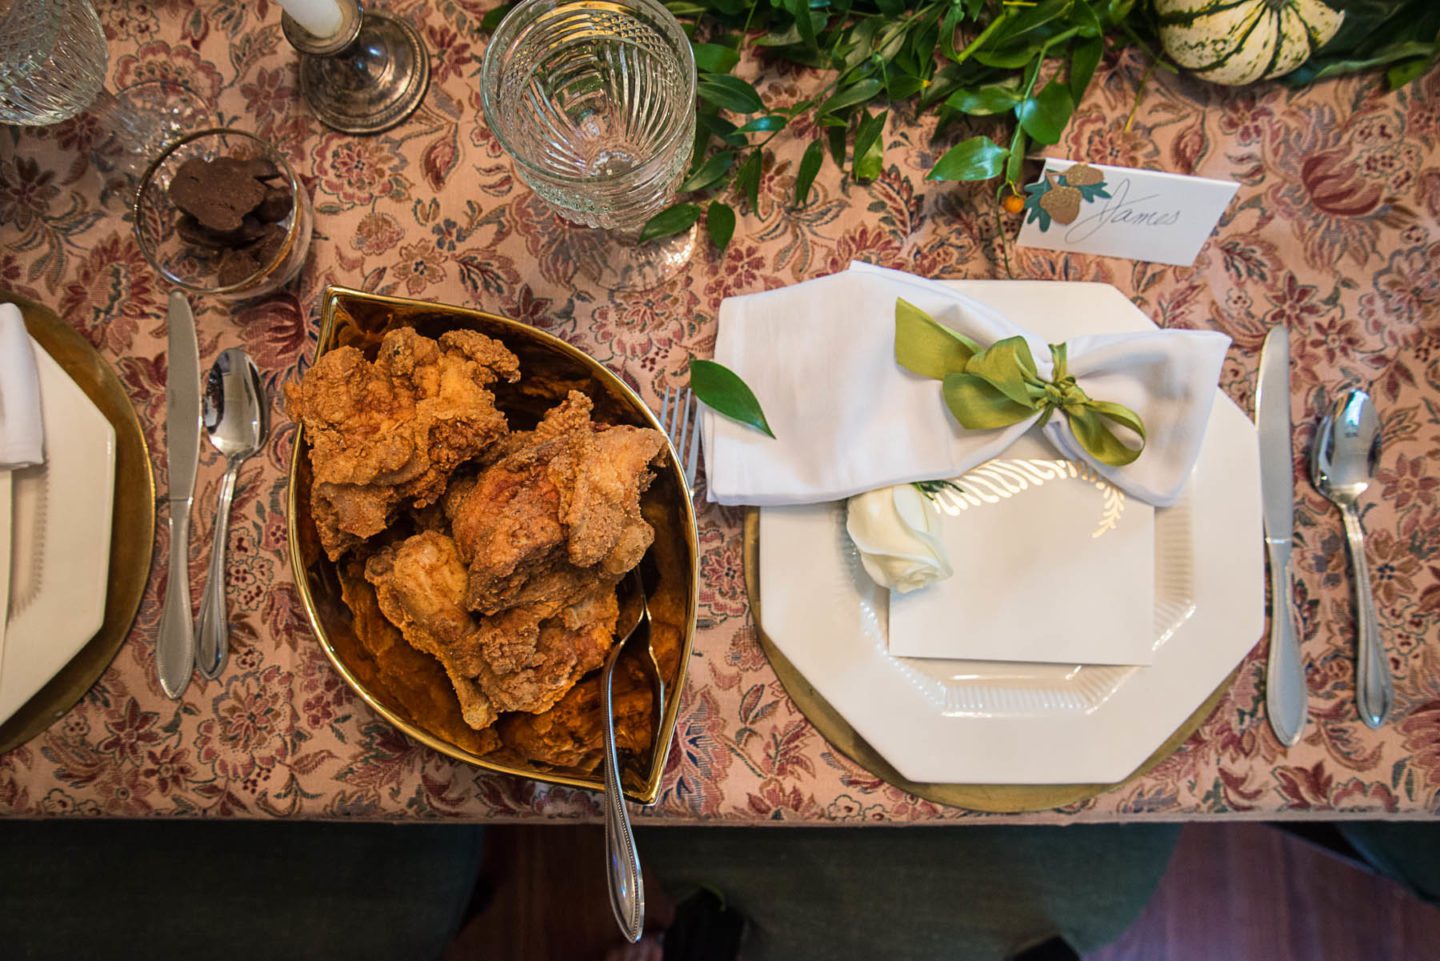 The “Famous Fried Chicken Festival” Inspired by Black Women